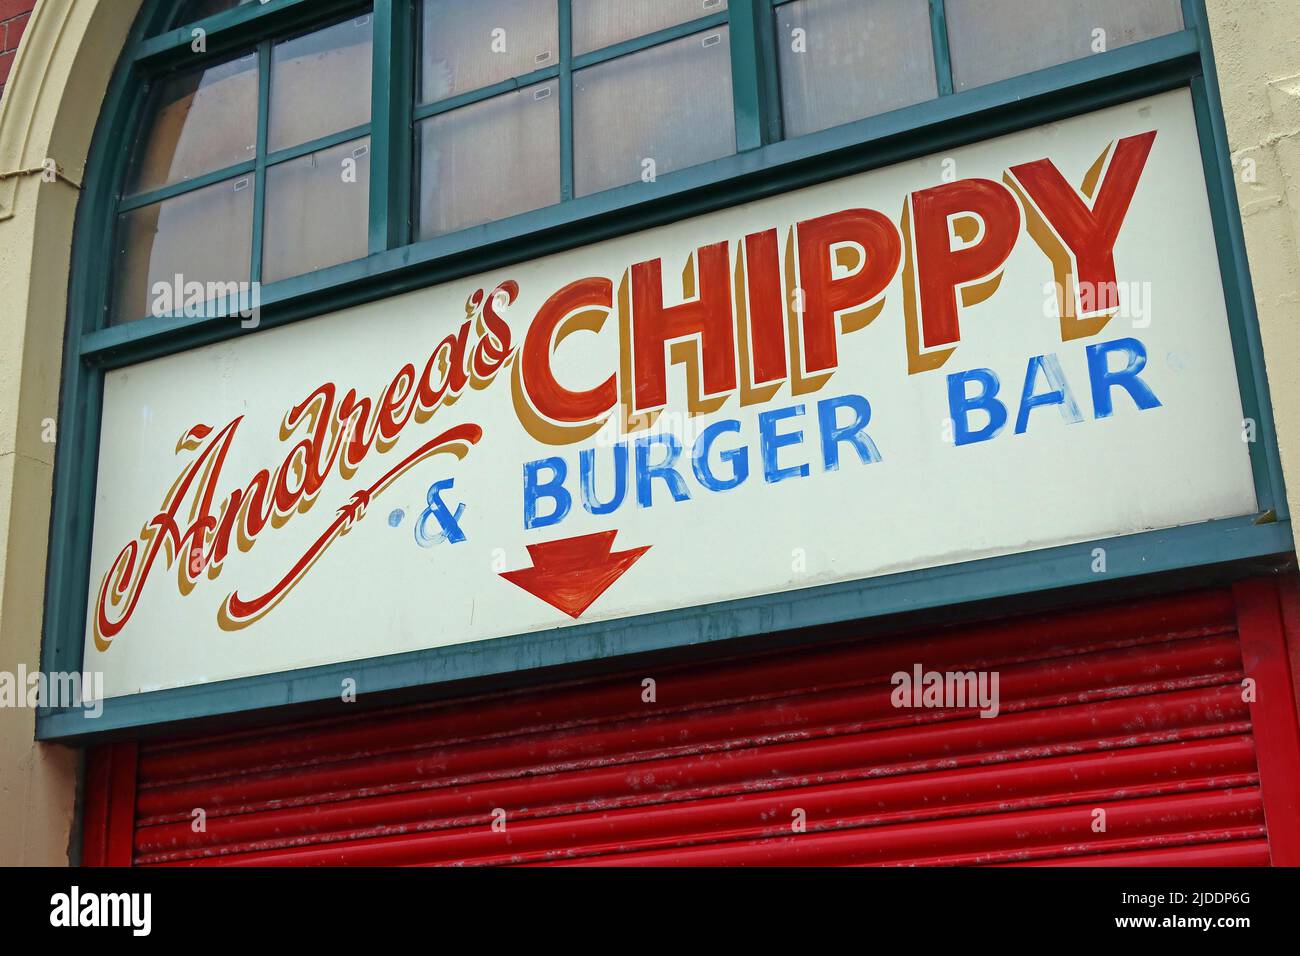 Andreas Chippy burger bar Barry Island, island, 3 western shelter, Paget Rd, Barry, Vale of Glamorgan, Wales, CF62 5TQ Stock Photo